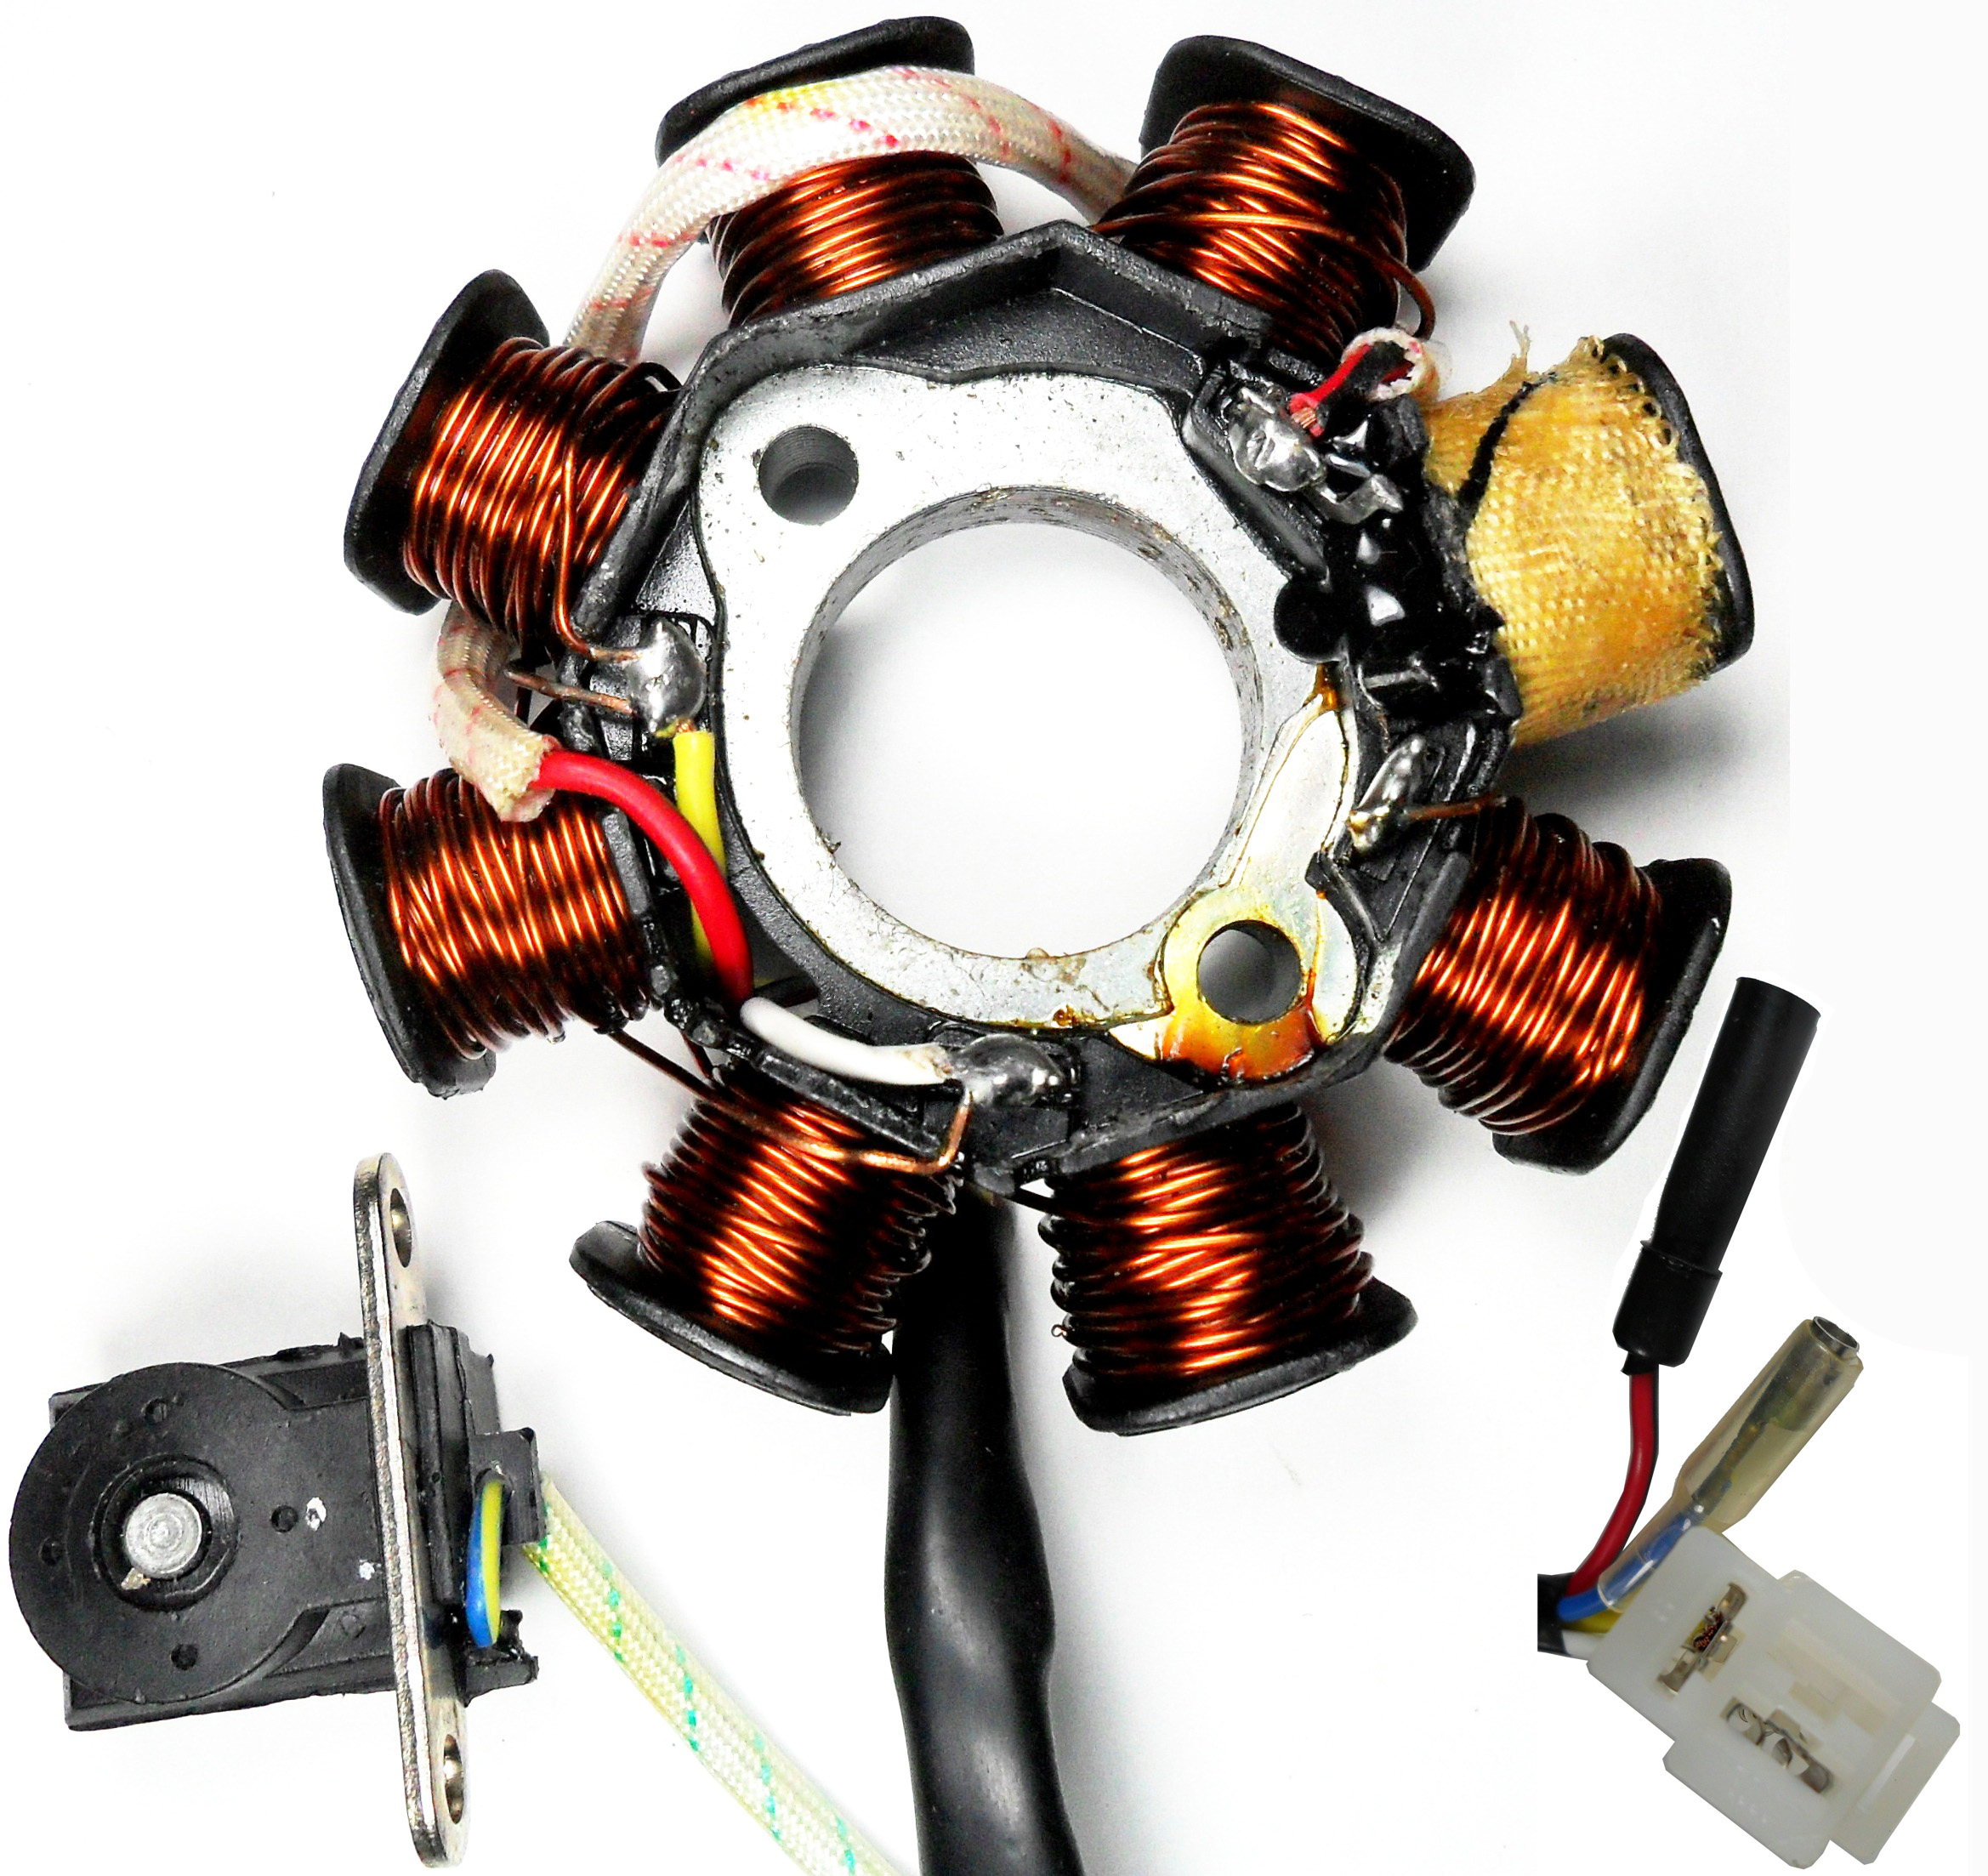 Stator 49-150cc 4 Stroke Fits Many Chinese ATV, GoKarts, Scooters 8 Coil 2 Pin in 3 Pin Jack + 2 Wires 1 Pole Wrapped Pickup Coil c/c=41